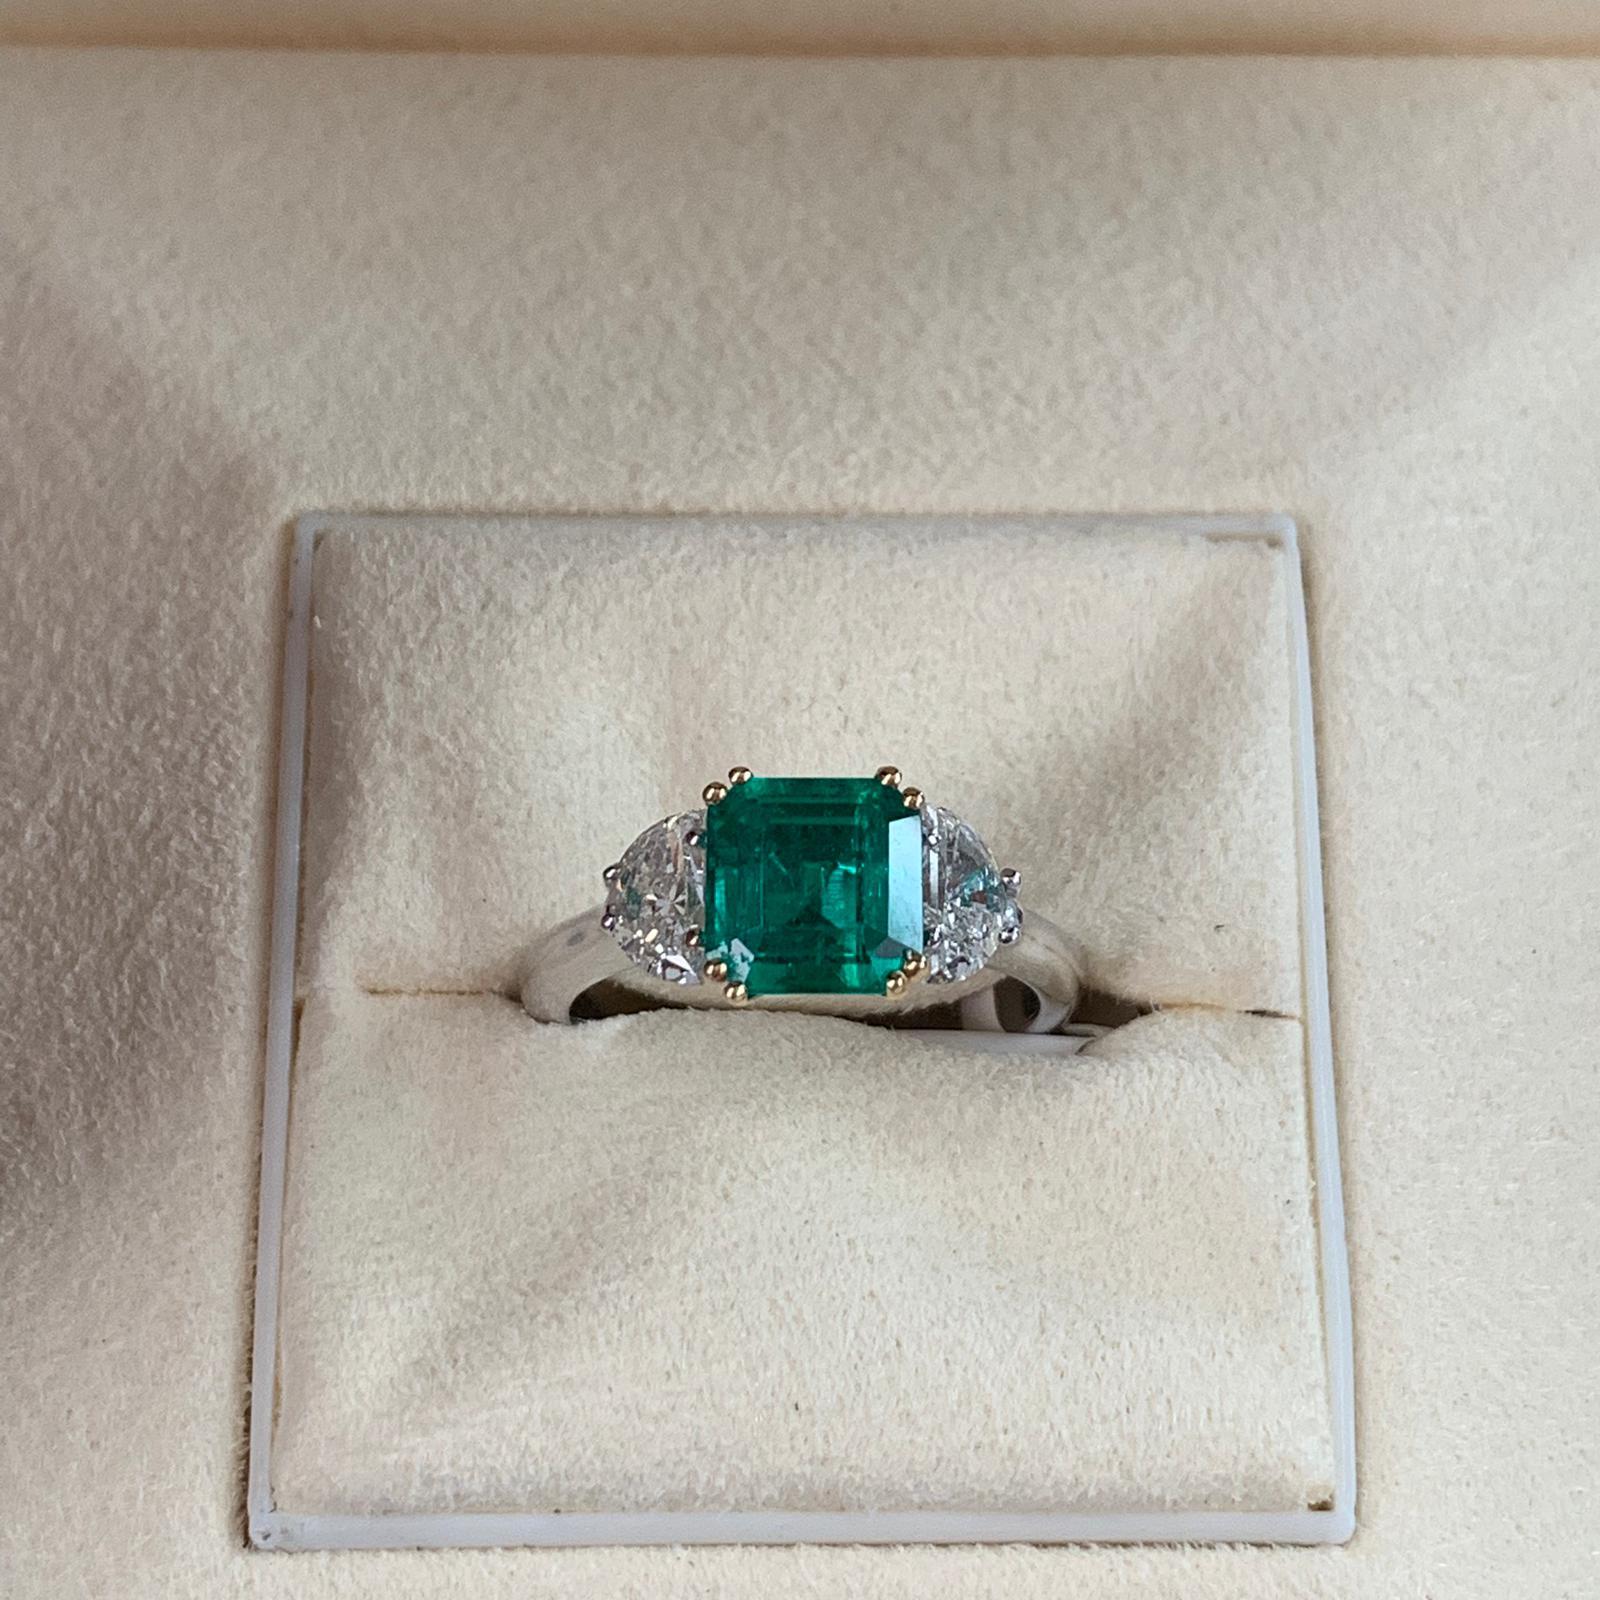 Beautiful 1.80 carats of Colombian Emerald, surrounded by 2 white trillion cut diamond 1.57 total carats. Set on 4 prong 18 karat white gold.